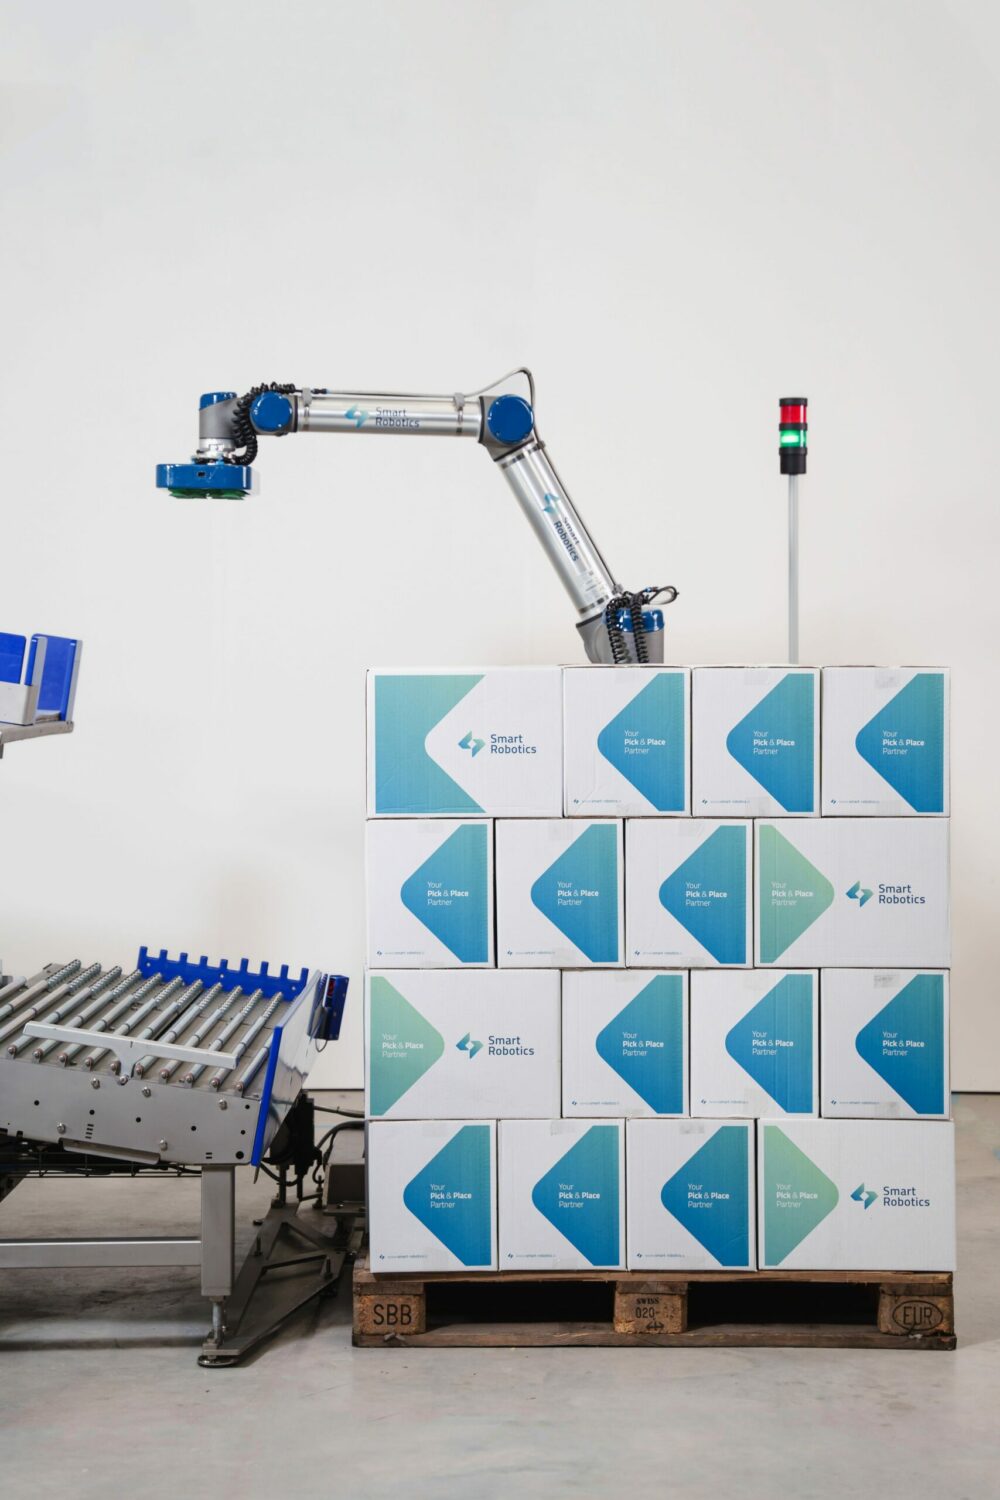 E-commerce fulfillment with a pick & place robot